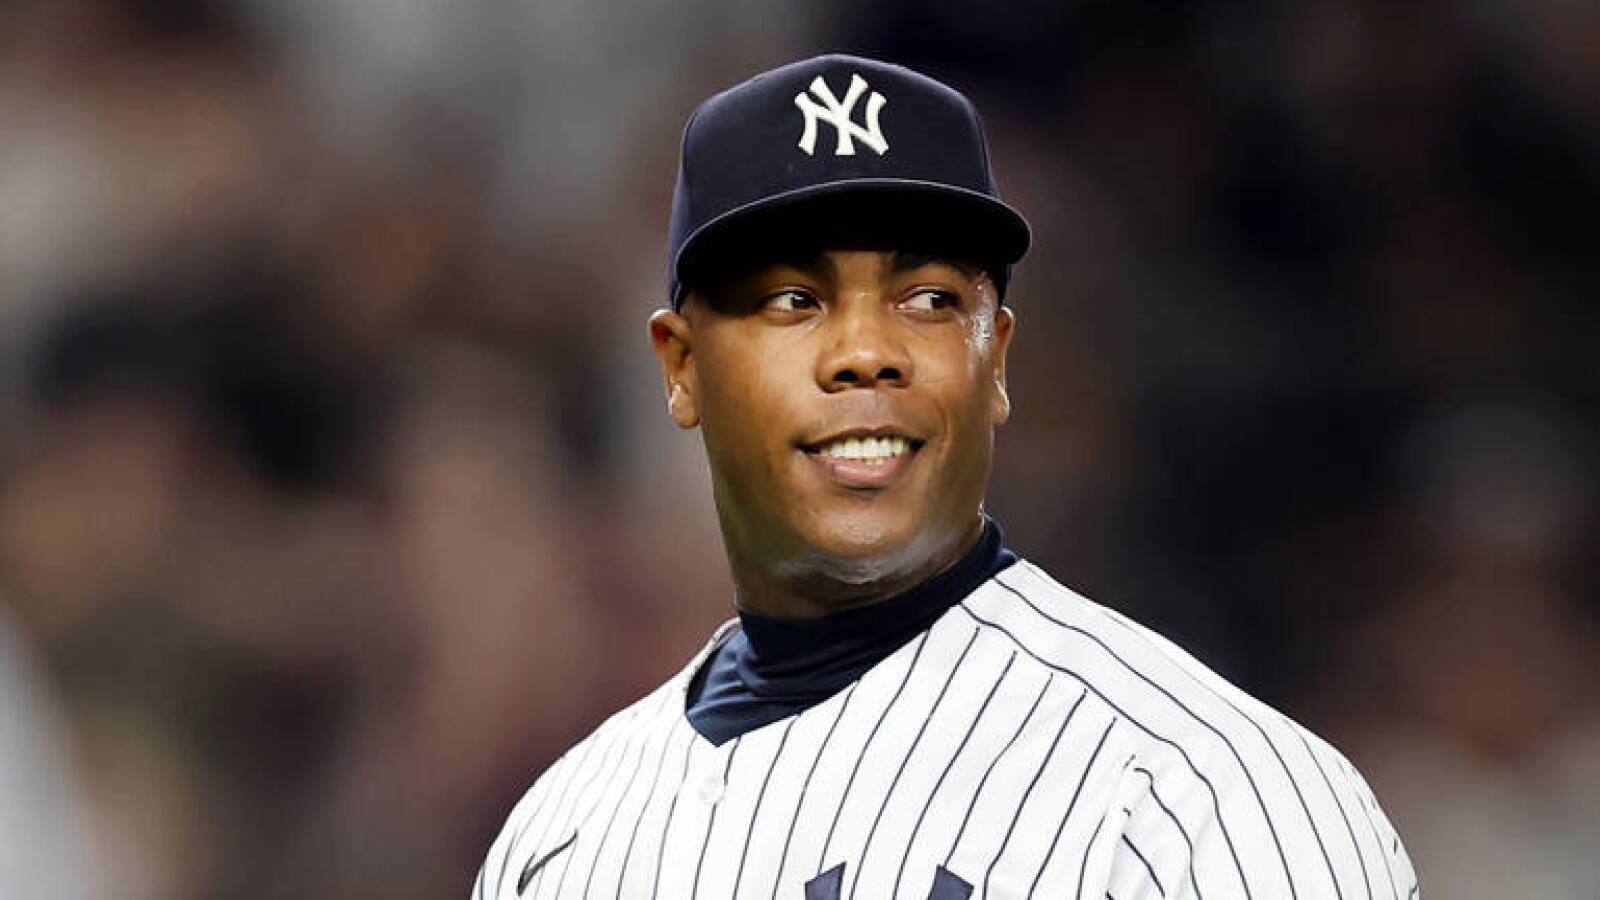 Yankees reliever Aroldis Chapman placed on IL with leg infection from recent tattoo